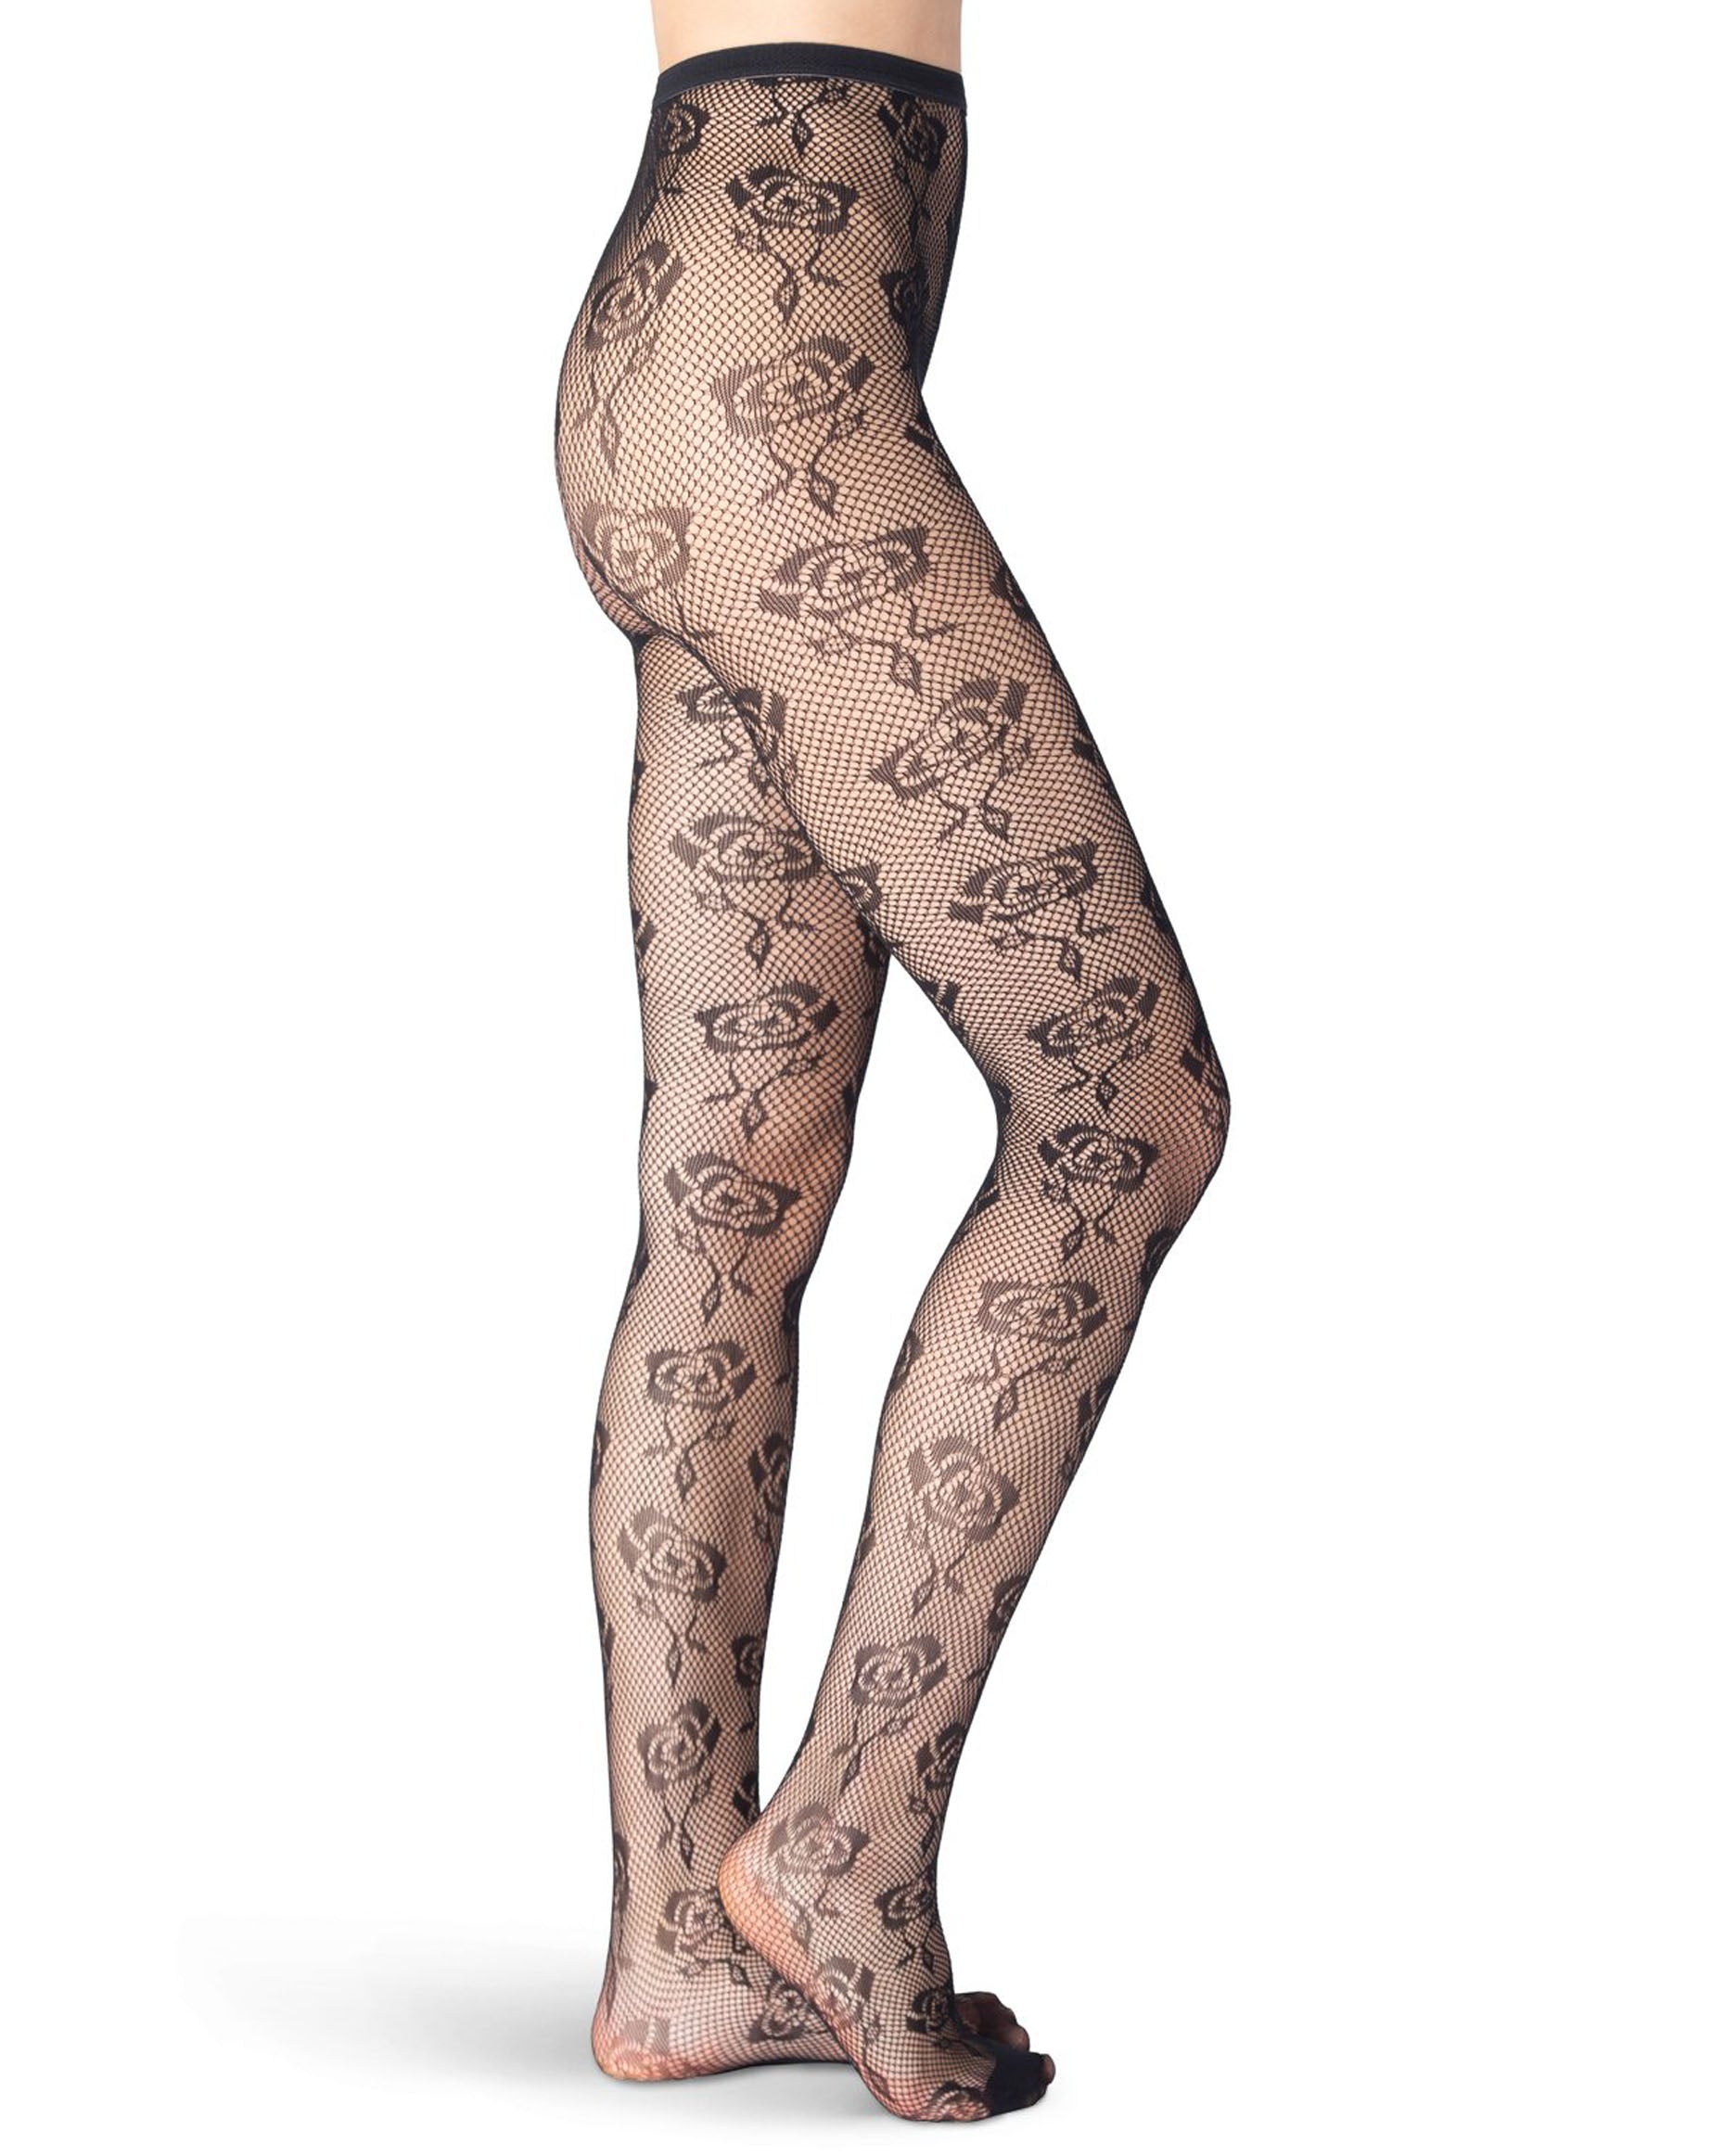 Emilio Cavallini Tiny Roses Tights - Black openwork fishnet tights with an all over roses lace style pattern, seamless body and reinforced micro-mesh toe.